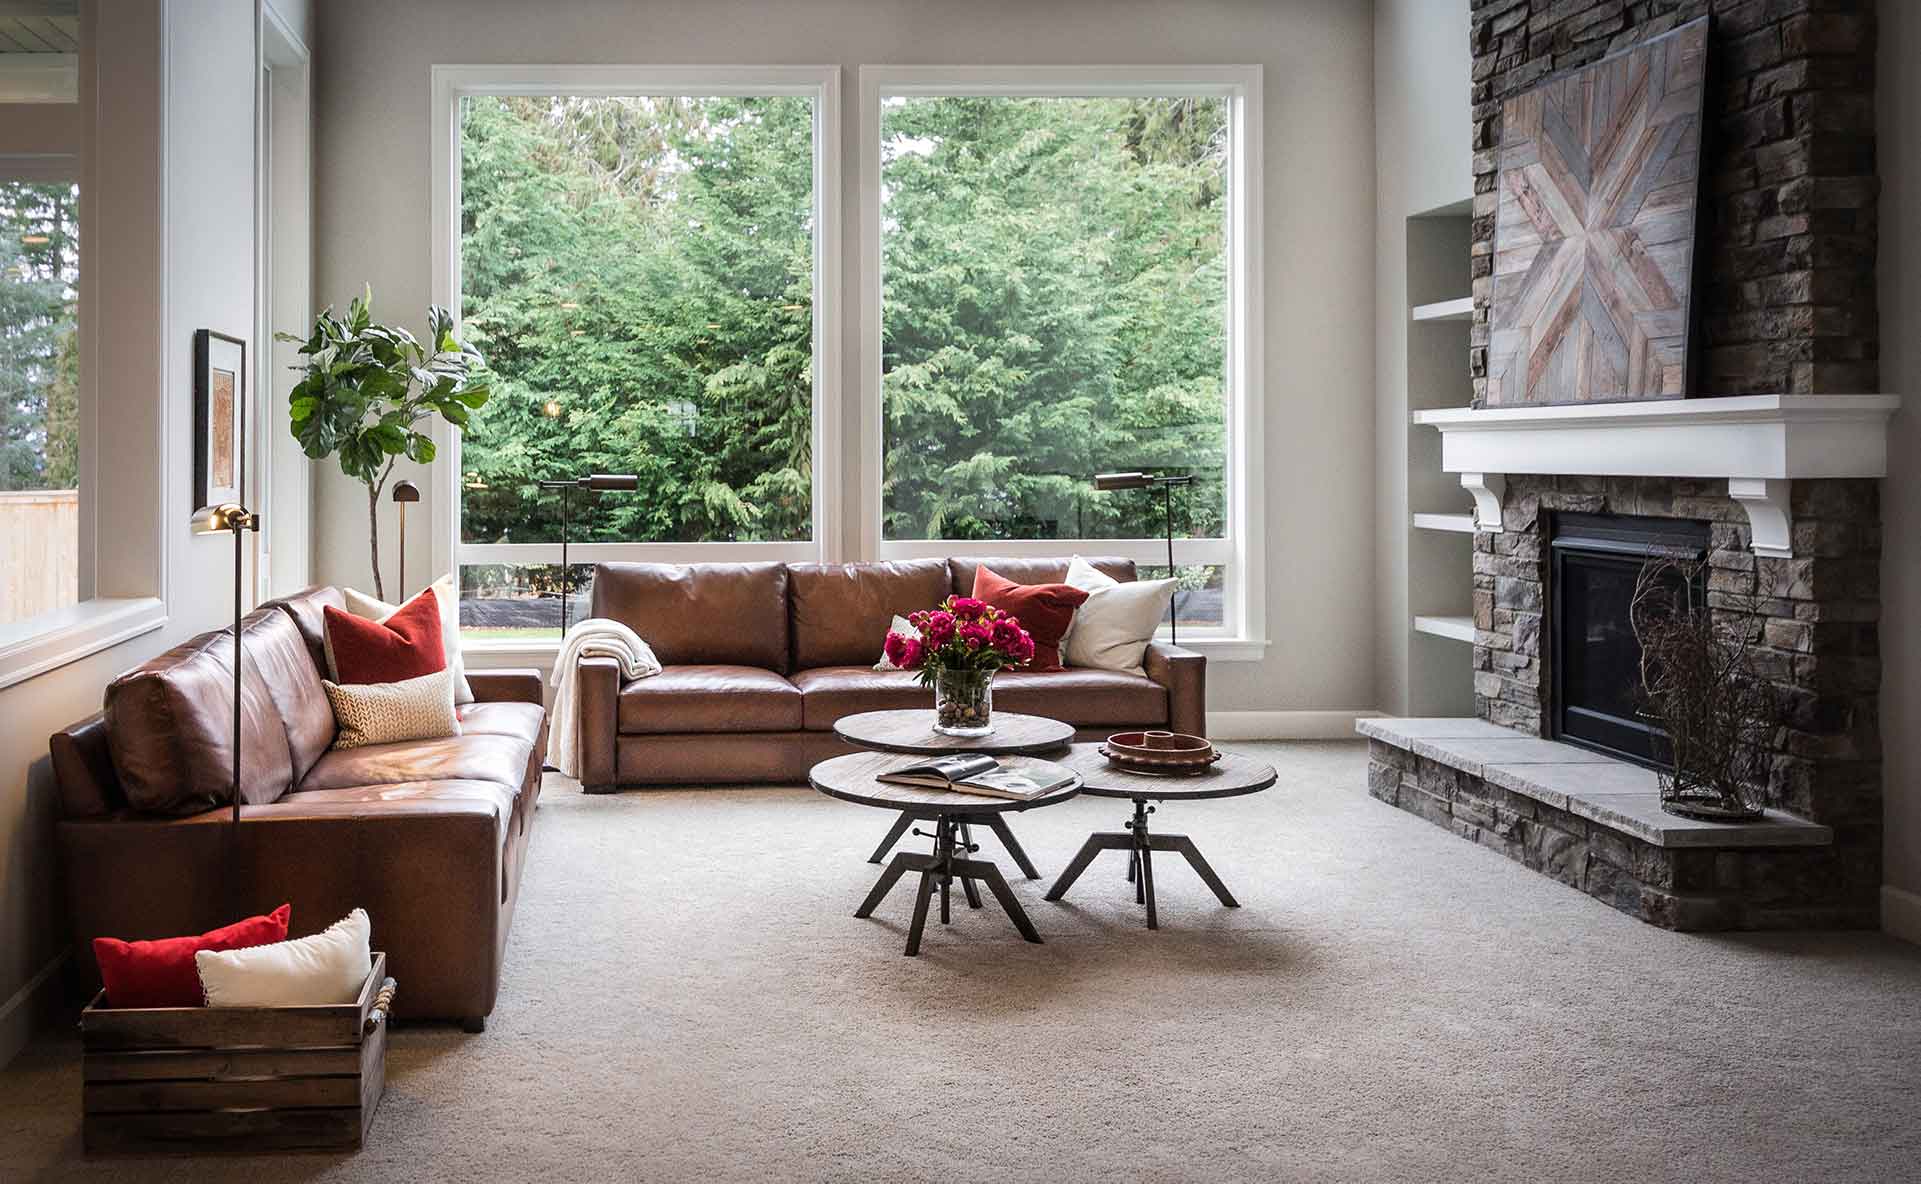 Most Popular Window Treatments For Living Room